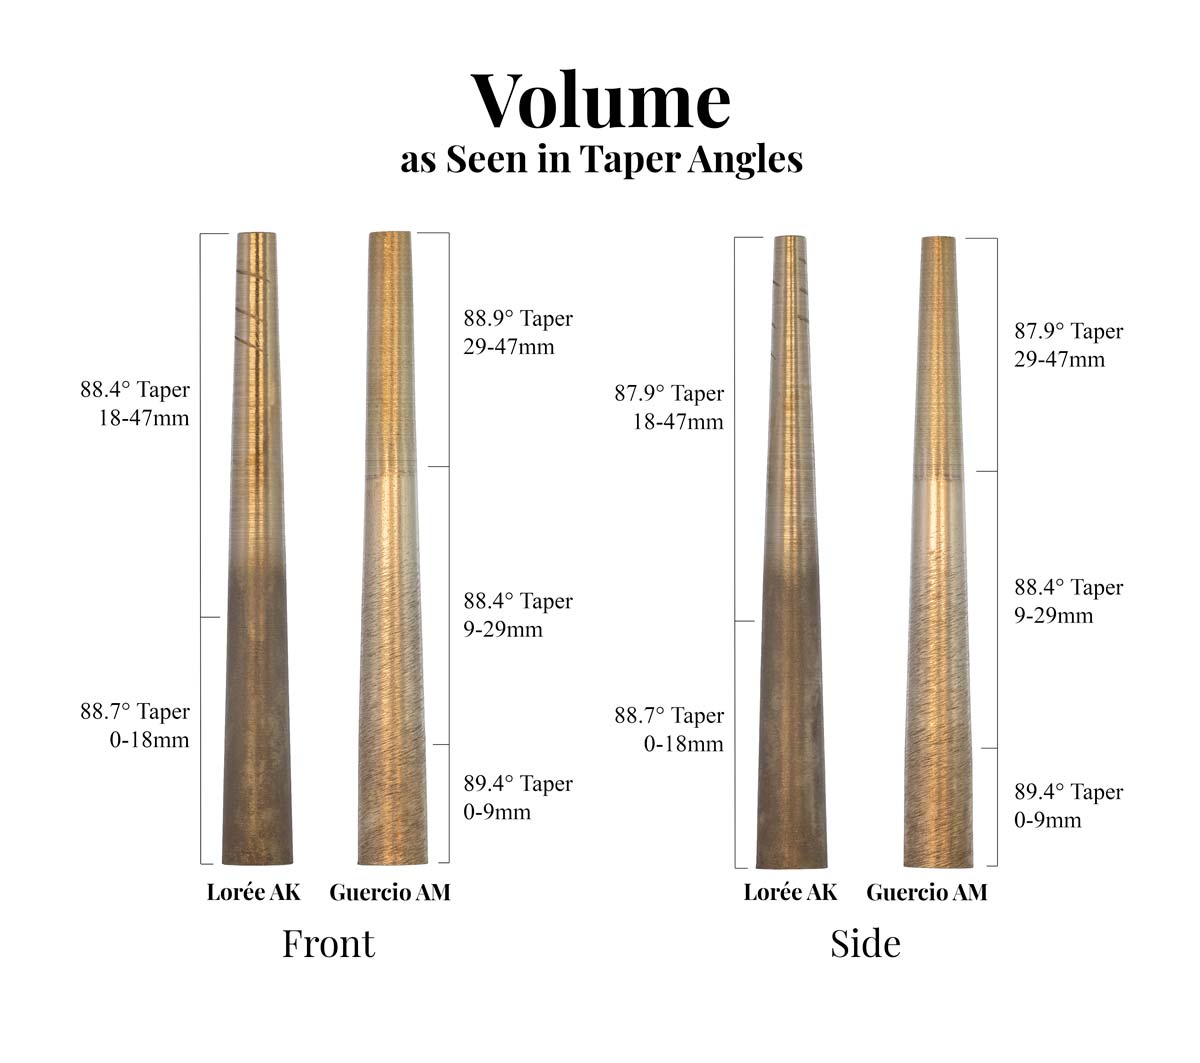 Volume as Seen in Taper Angles